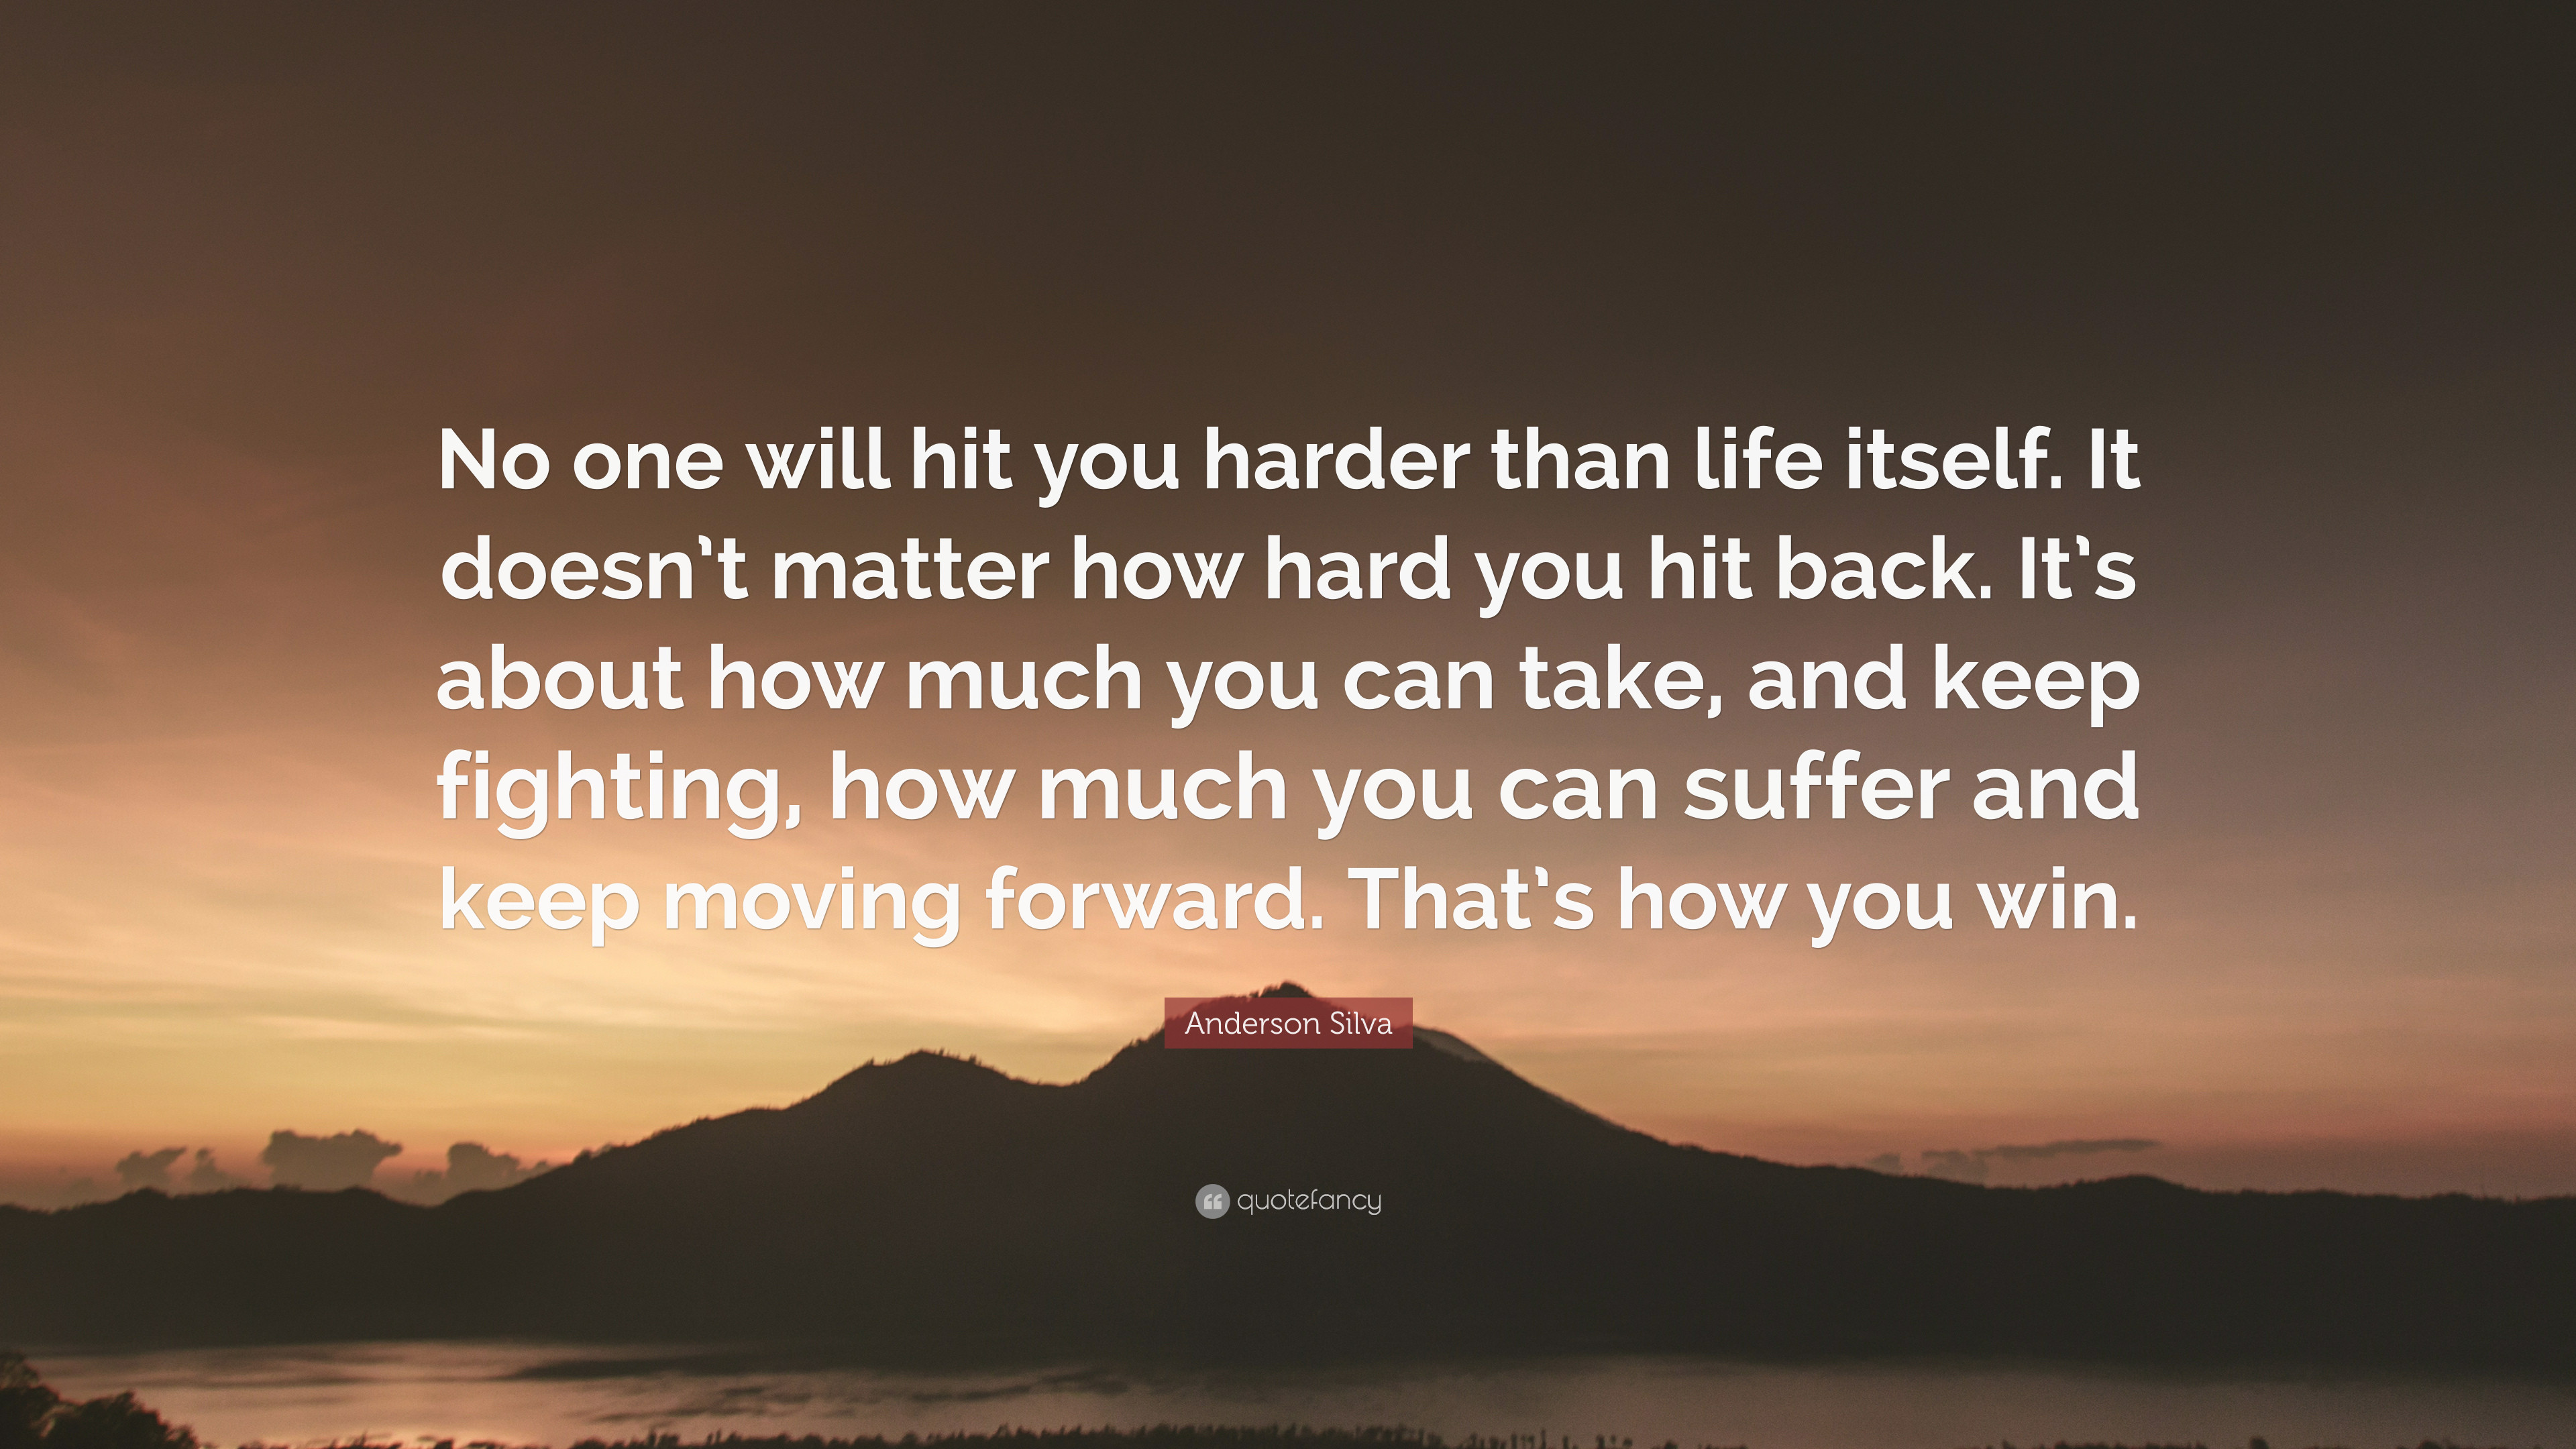 3840x2160 Anderson Silva Quote: “No one will hit you harder than life itself. It